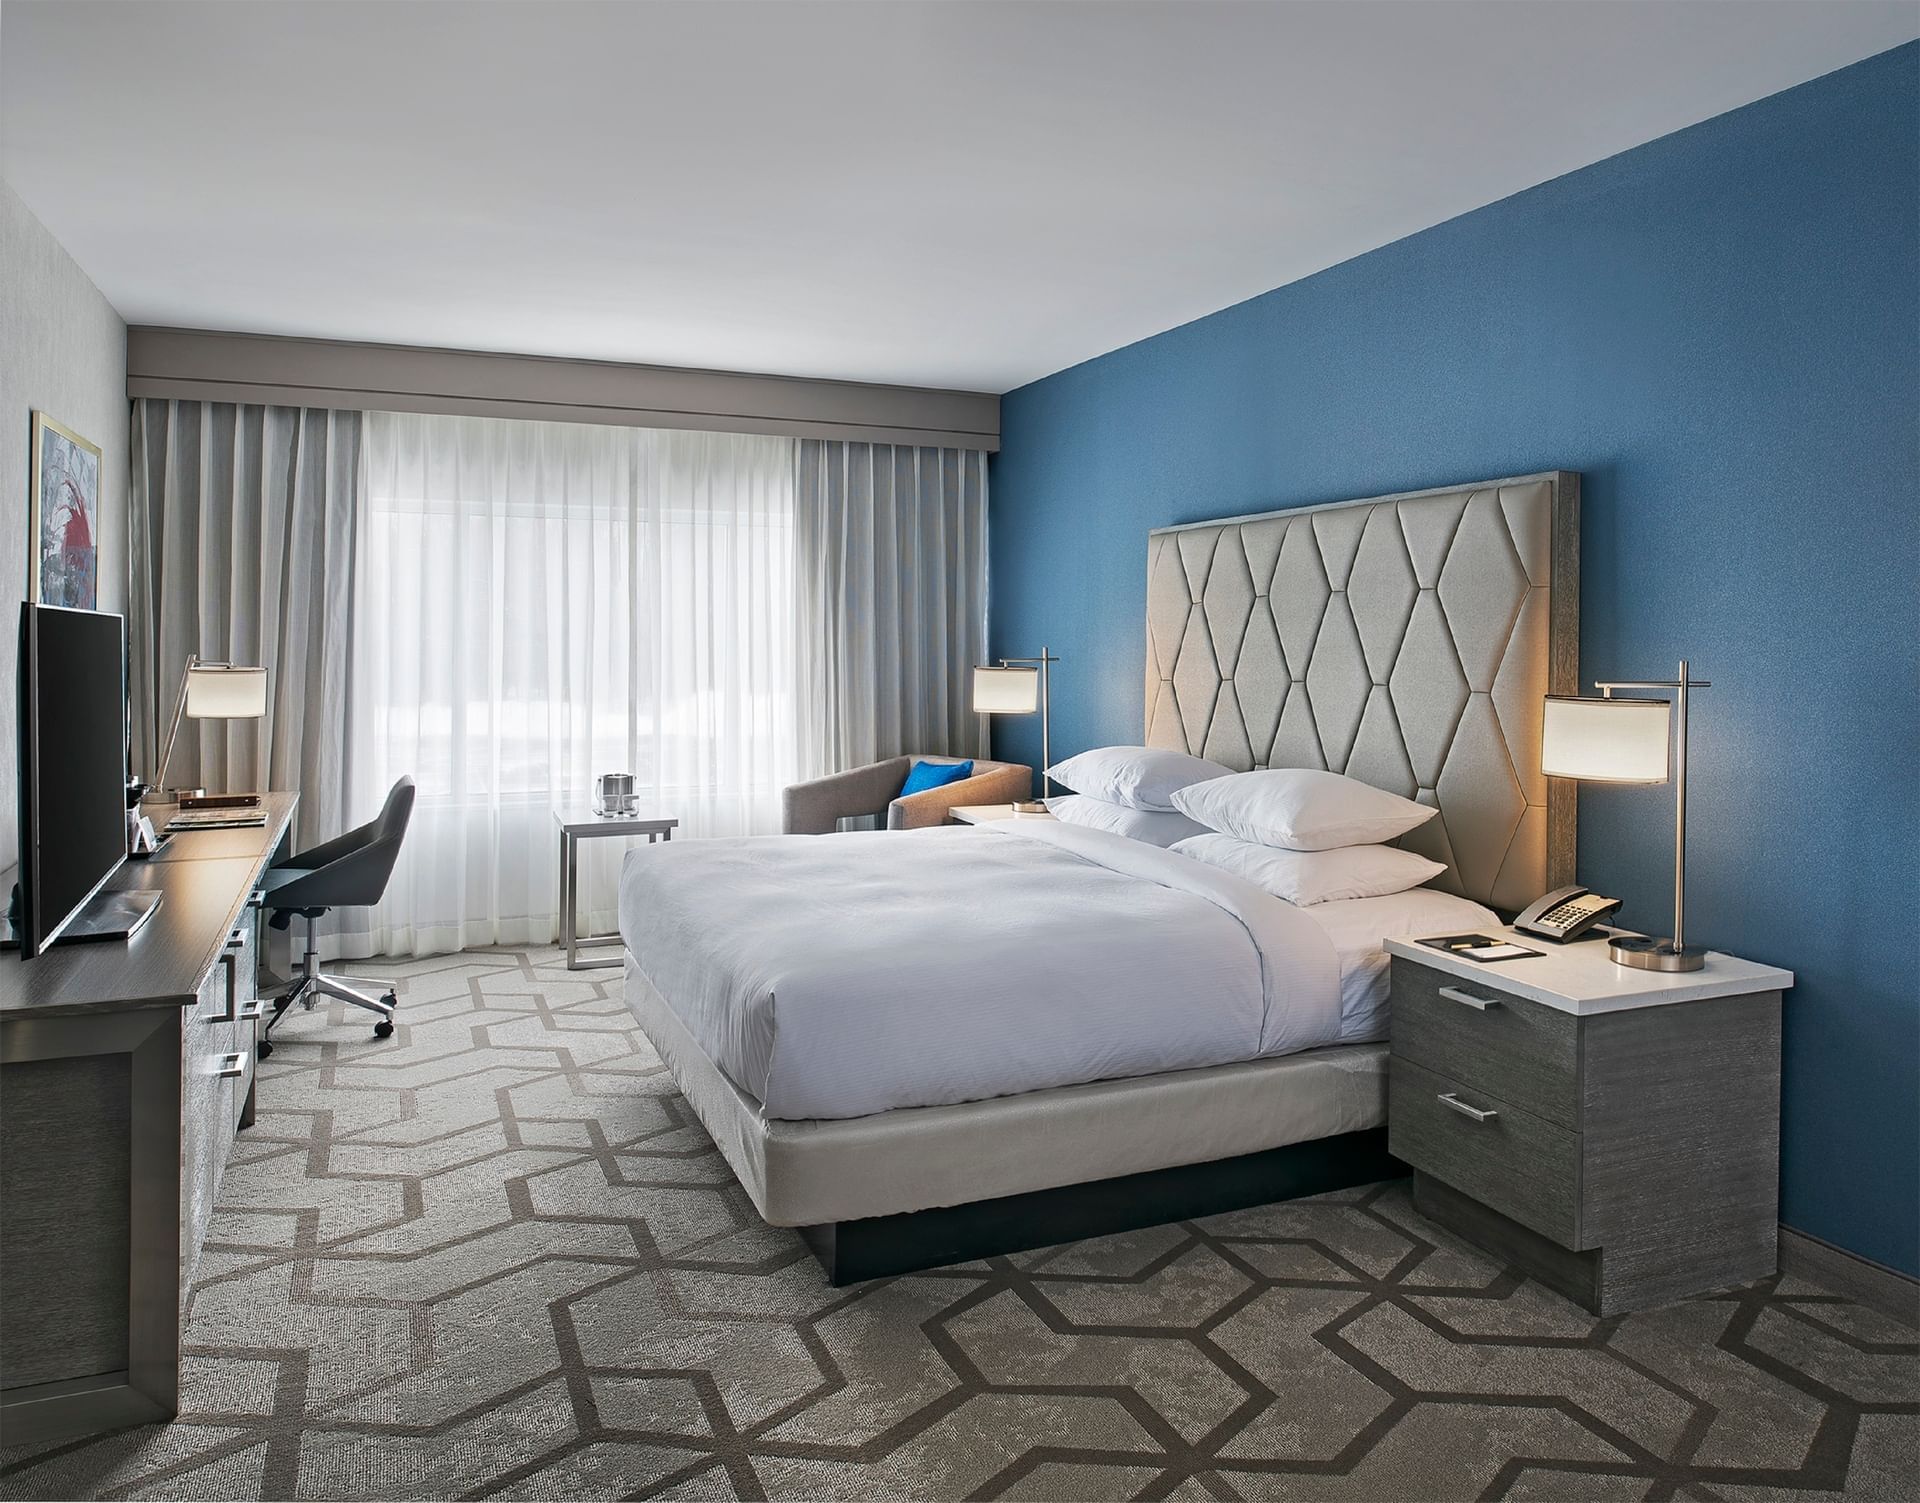 Bloomfield Hills Hotel Rooms at The Kingsley Bloomfield Hills - a  Doubletree by Hilton